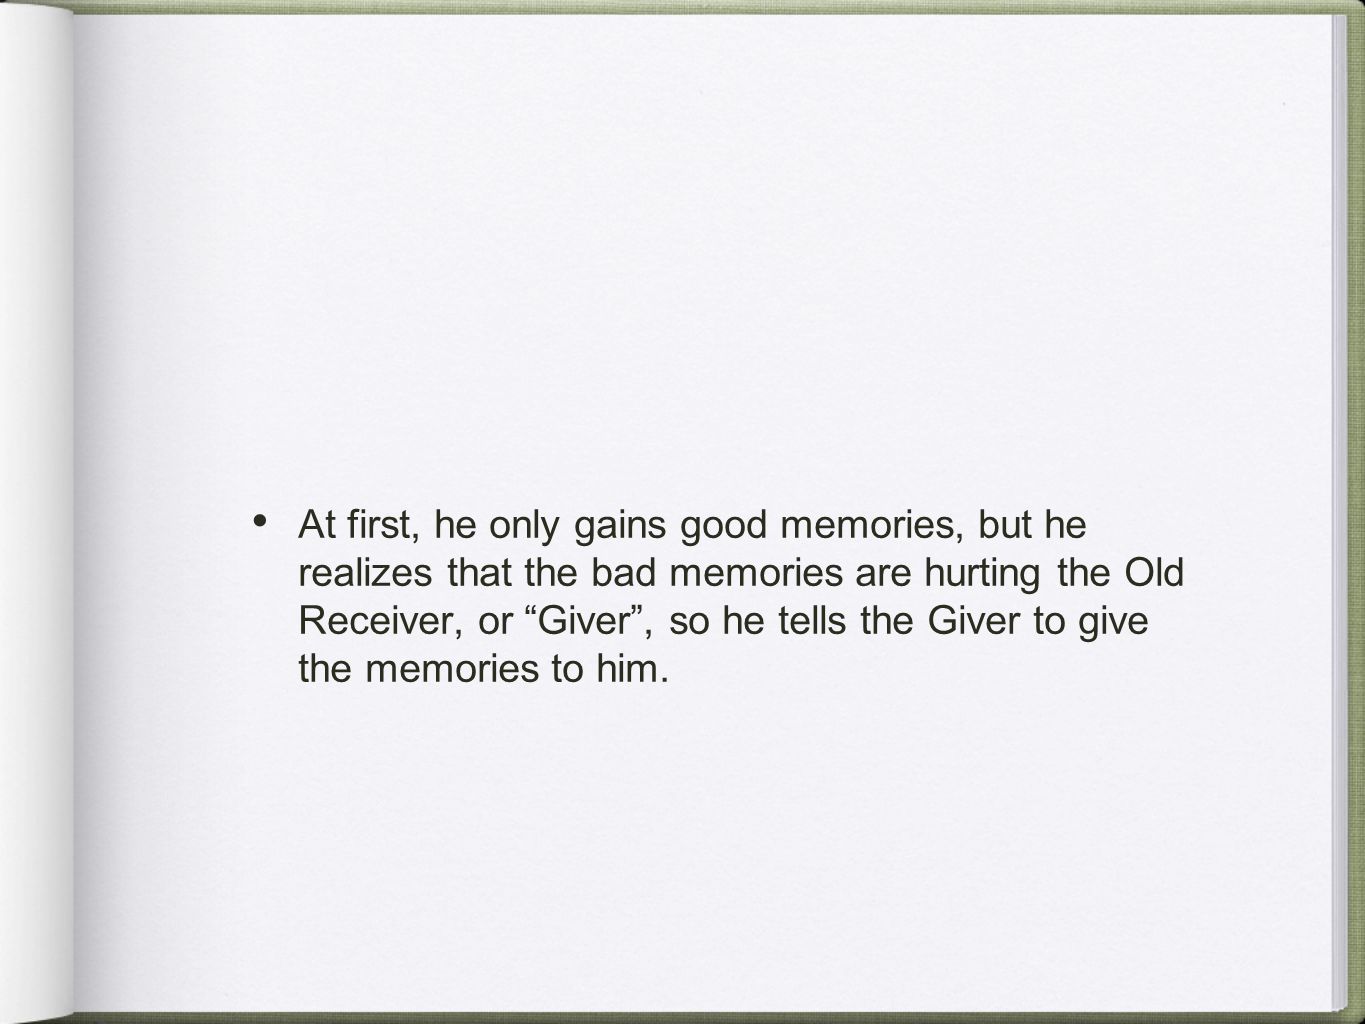 At first, he only gains good memories, but he realizes that the bad memories are hurting the Old Receiver, or Giver , so he tells the Giver to give the memories to him.